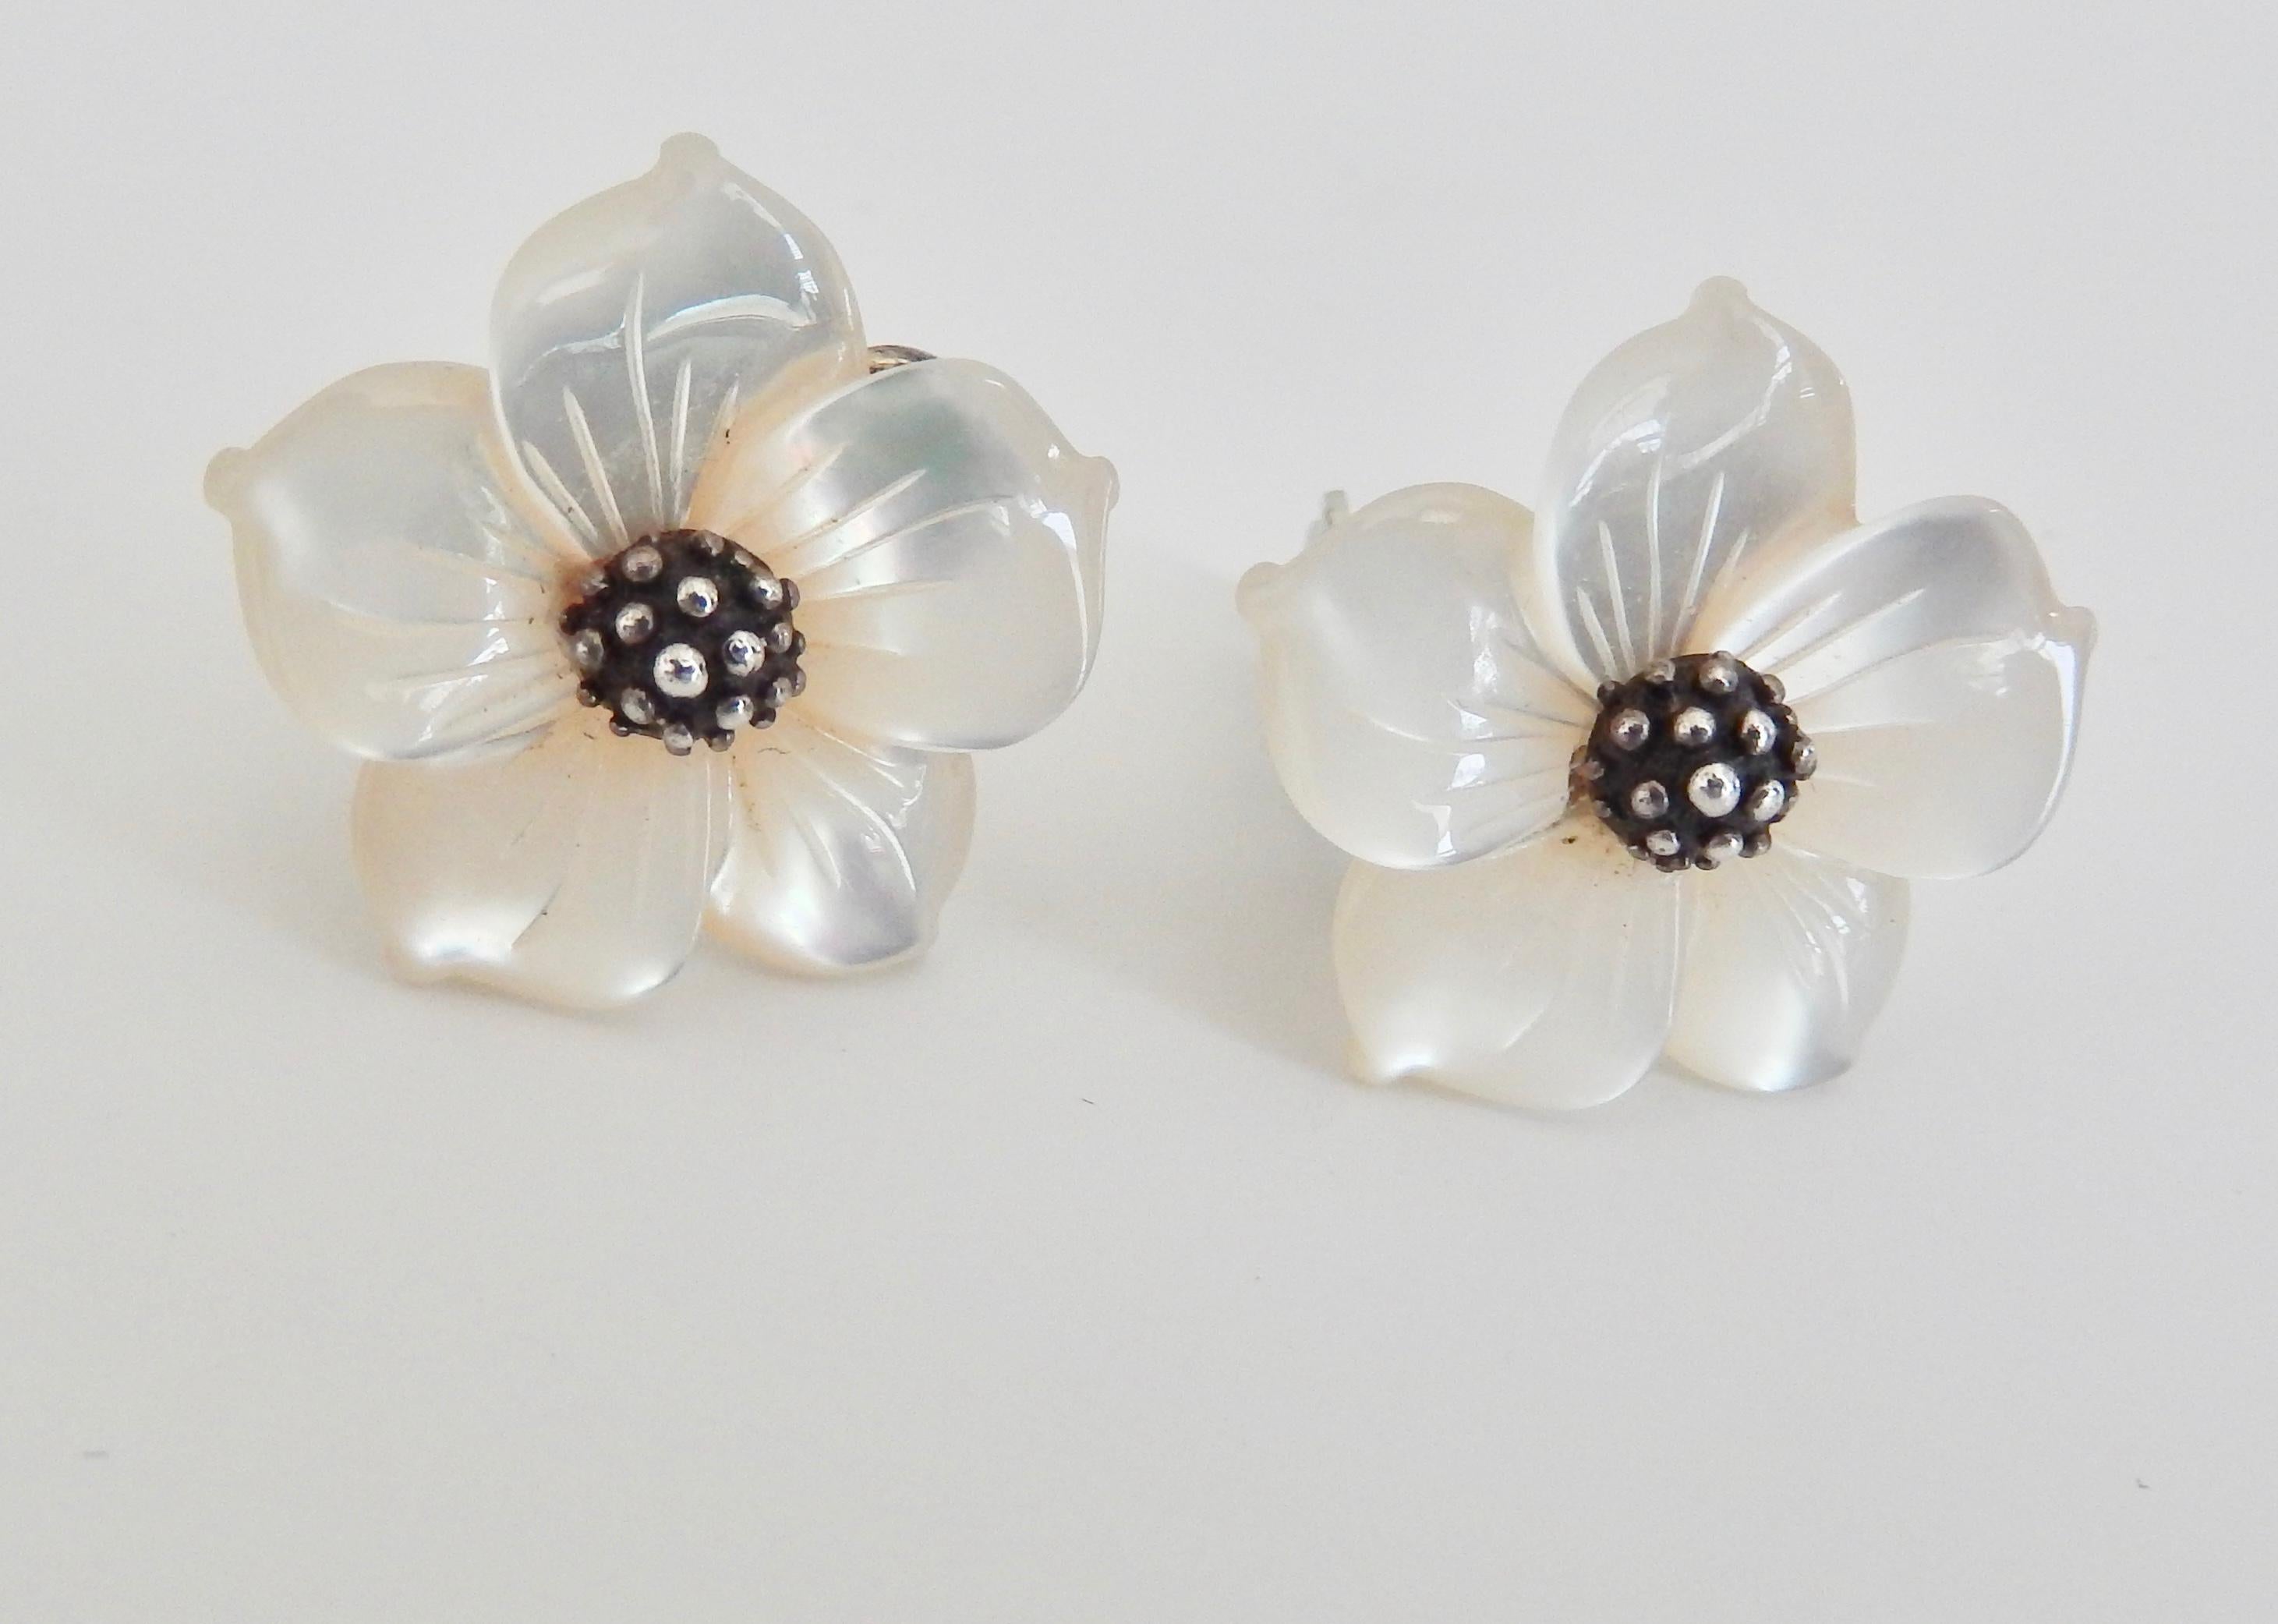 A graceful pair of vintage sterling and carved mother-of-pearl clip-on earrings by the New York designer Stephen Dweck.  Mother-of-pearl is combined with a sterling 